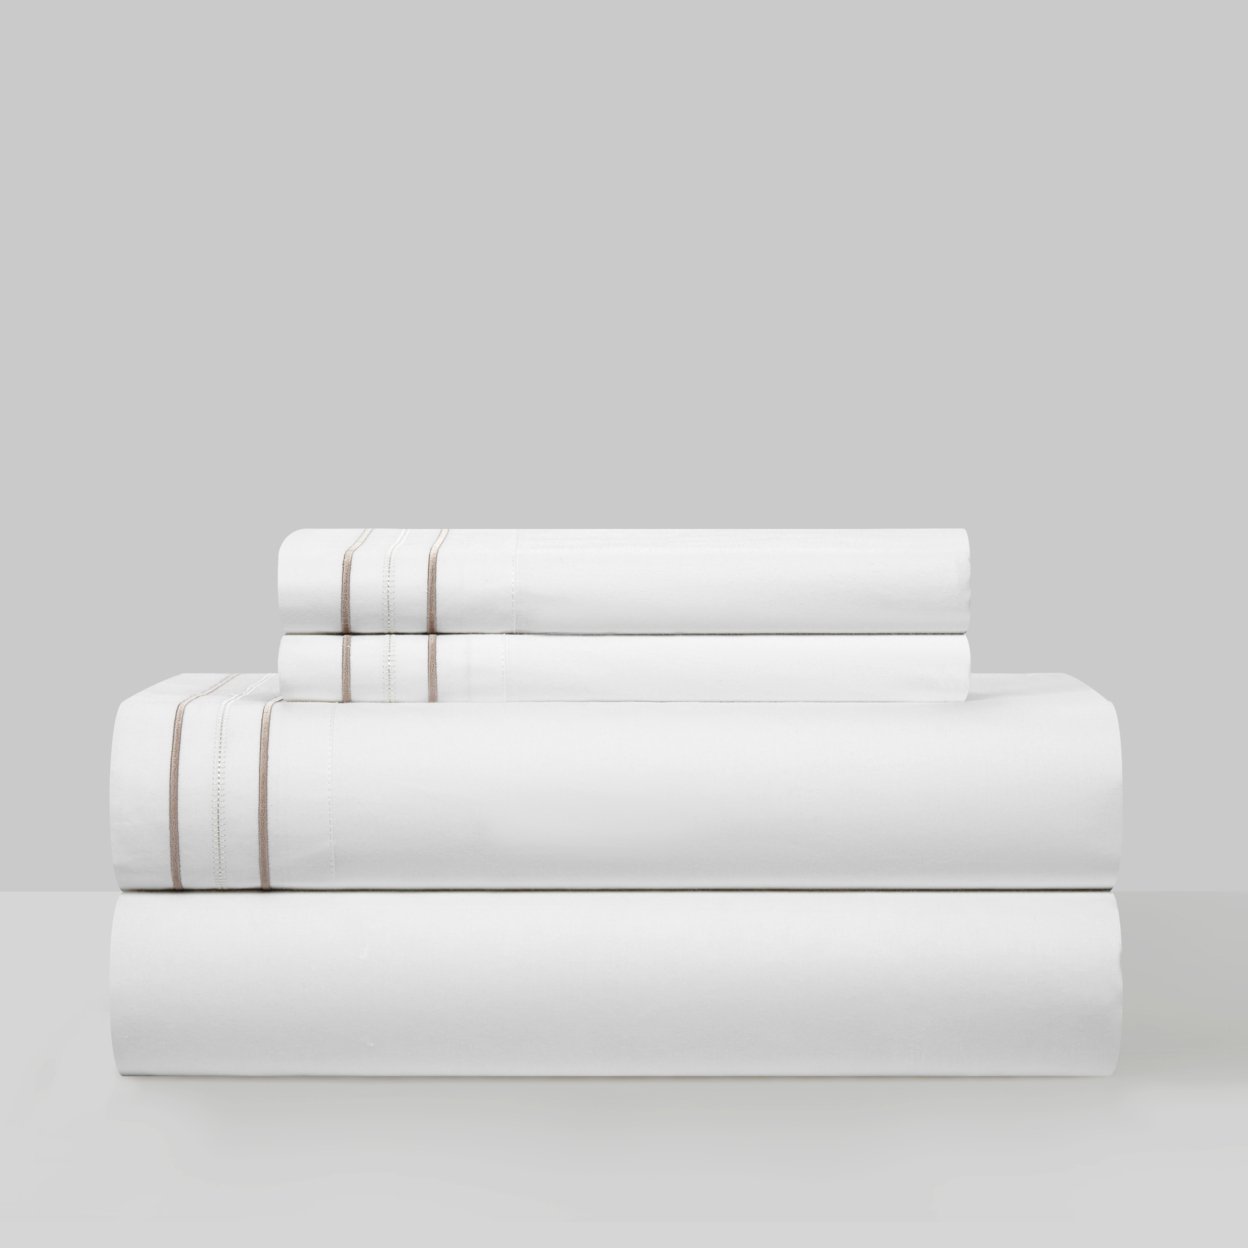 4 Piece Freeya Organic Cotton Sheet Set Solid White With Dual Stripe Embroidery - Grey, Queen